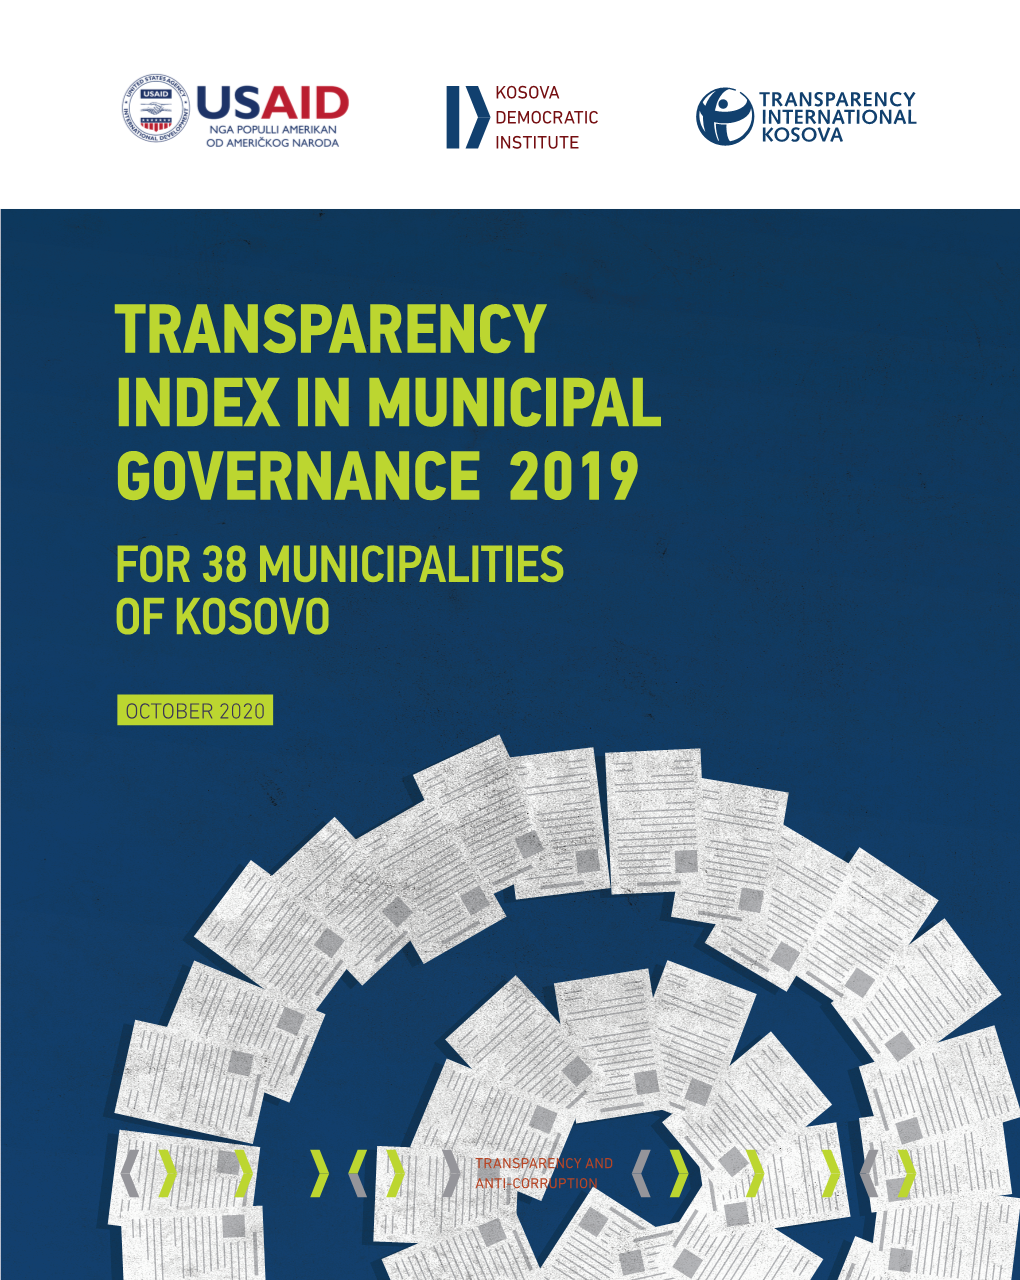 Transparency Index in Municipal Governance 2019 for 38 Municipalities of Kosovo